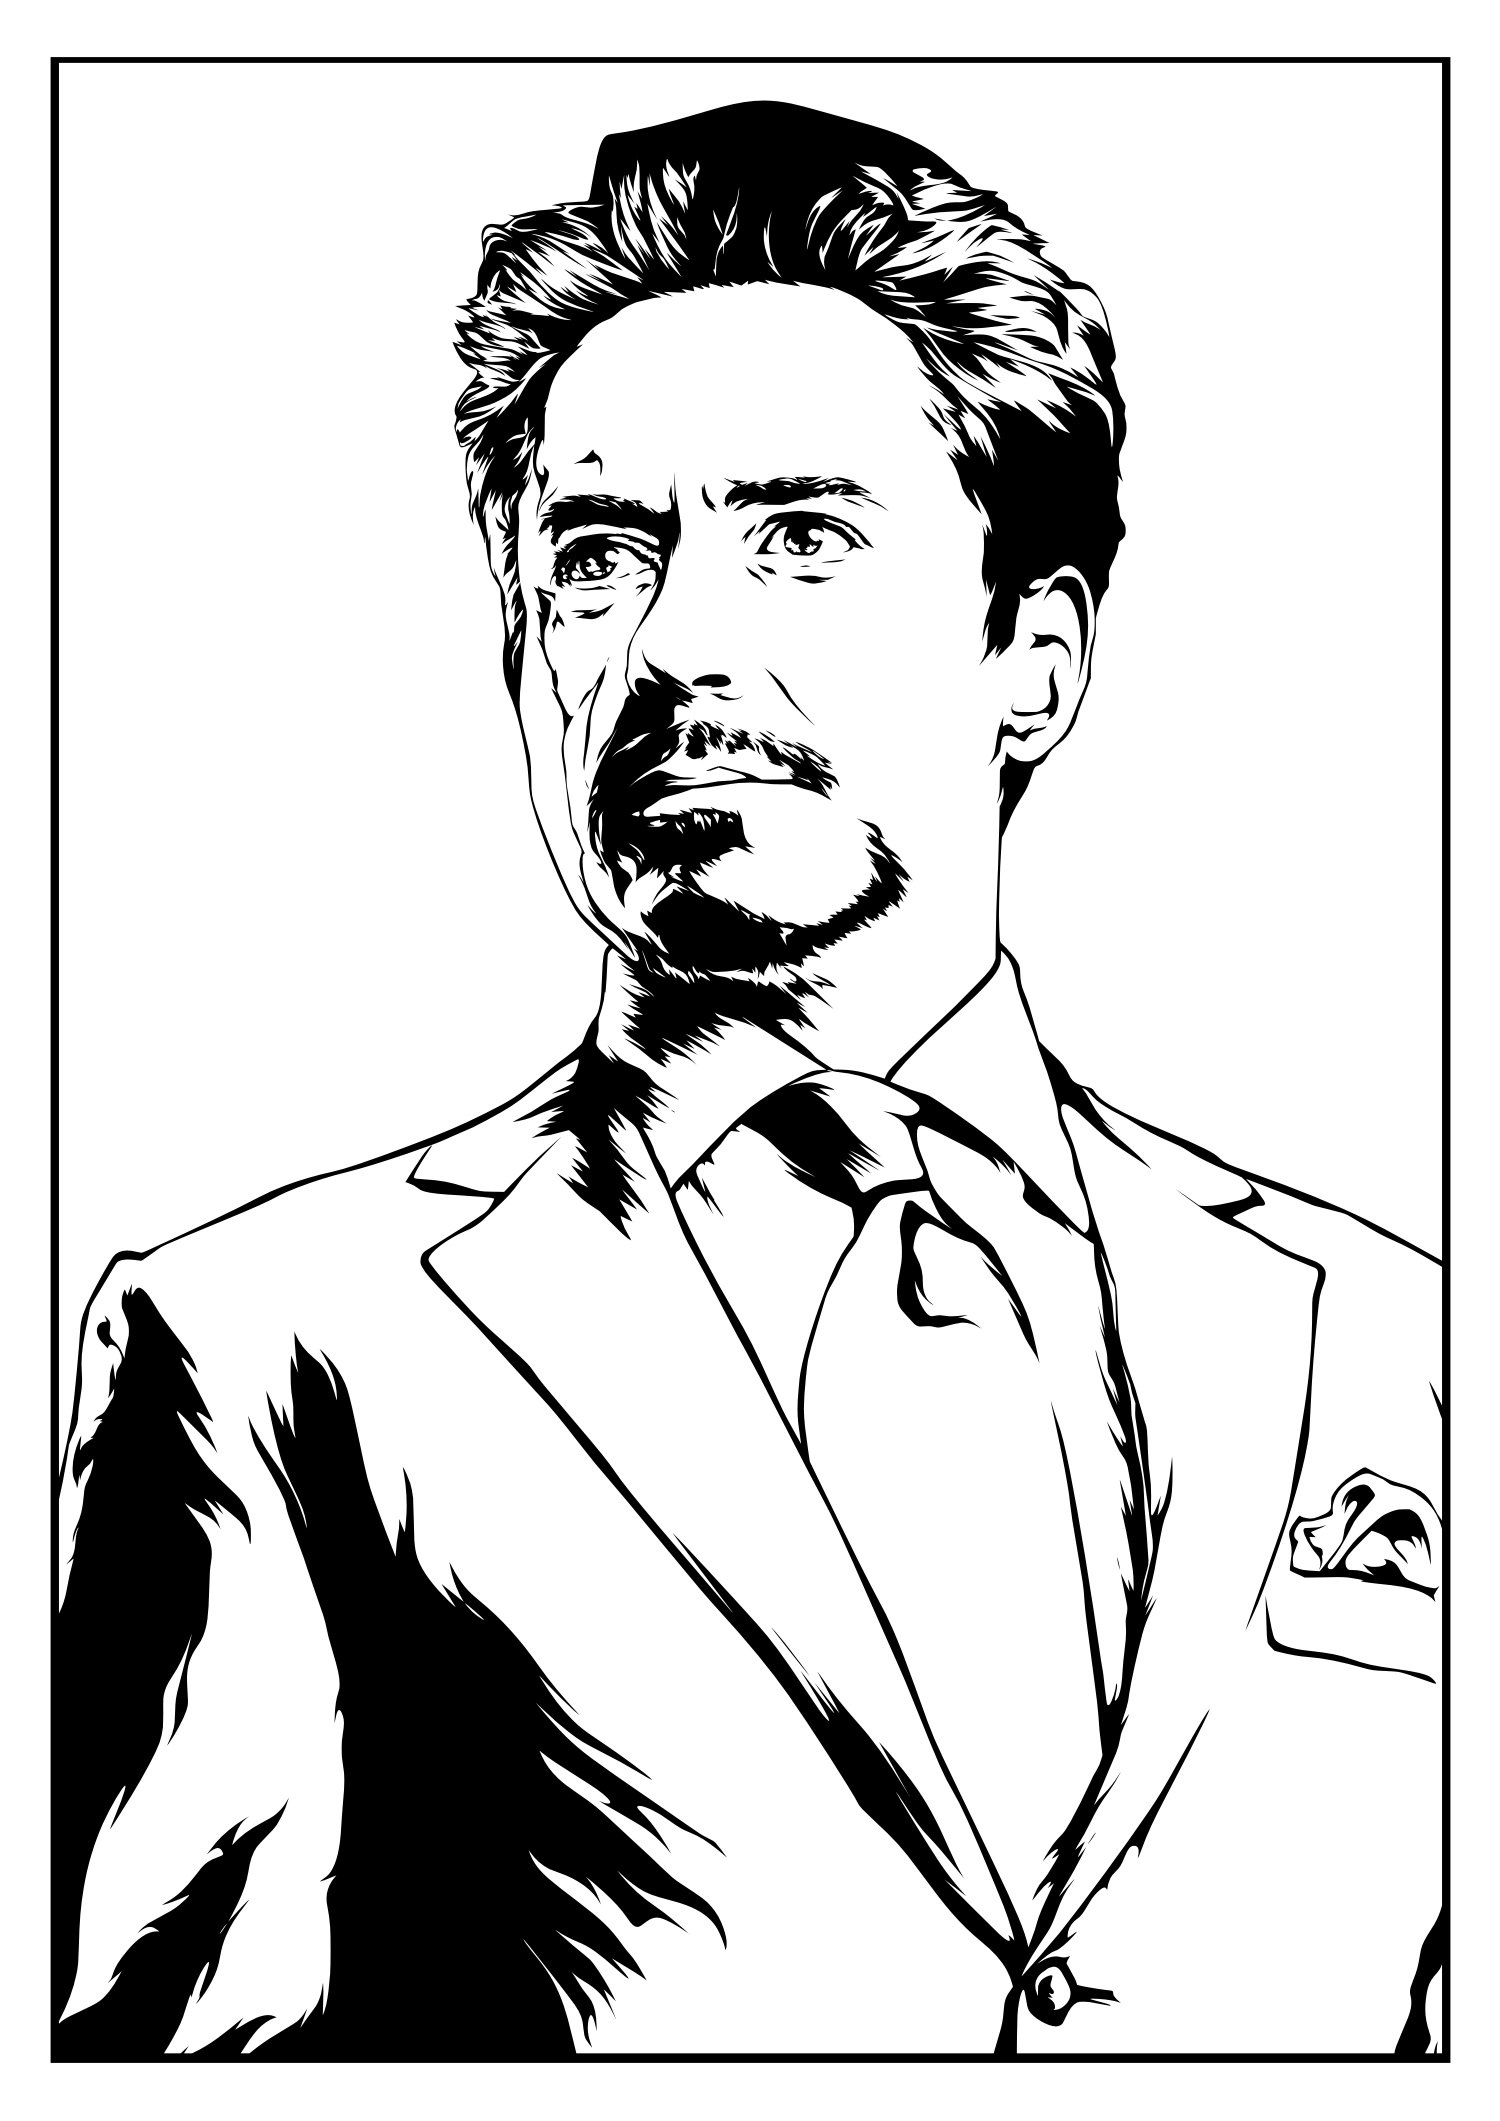 Tony Stark Free Vector cdr Download 3axis co